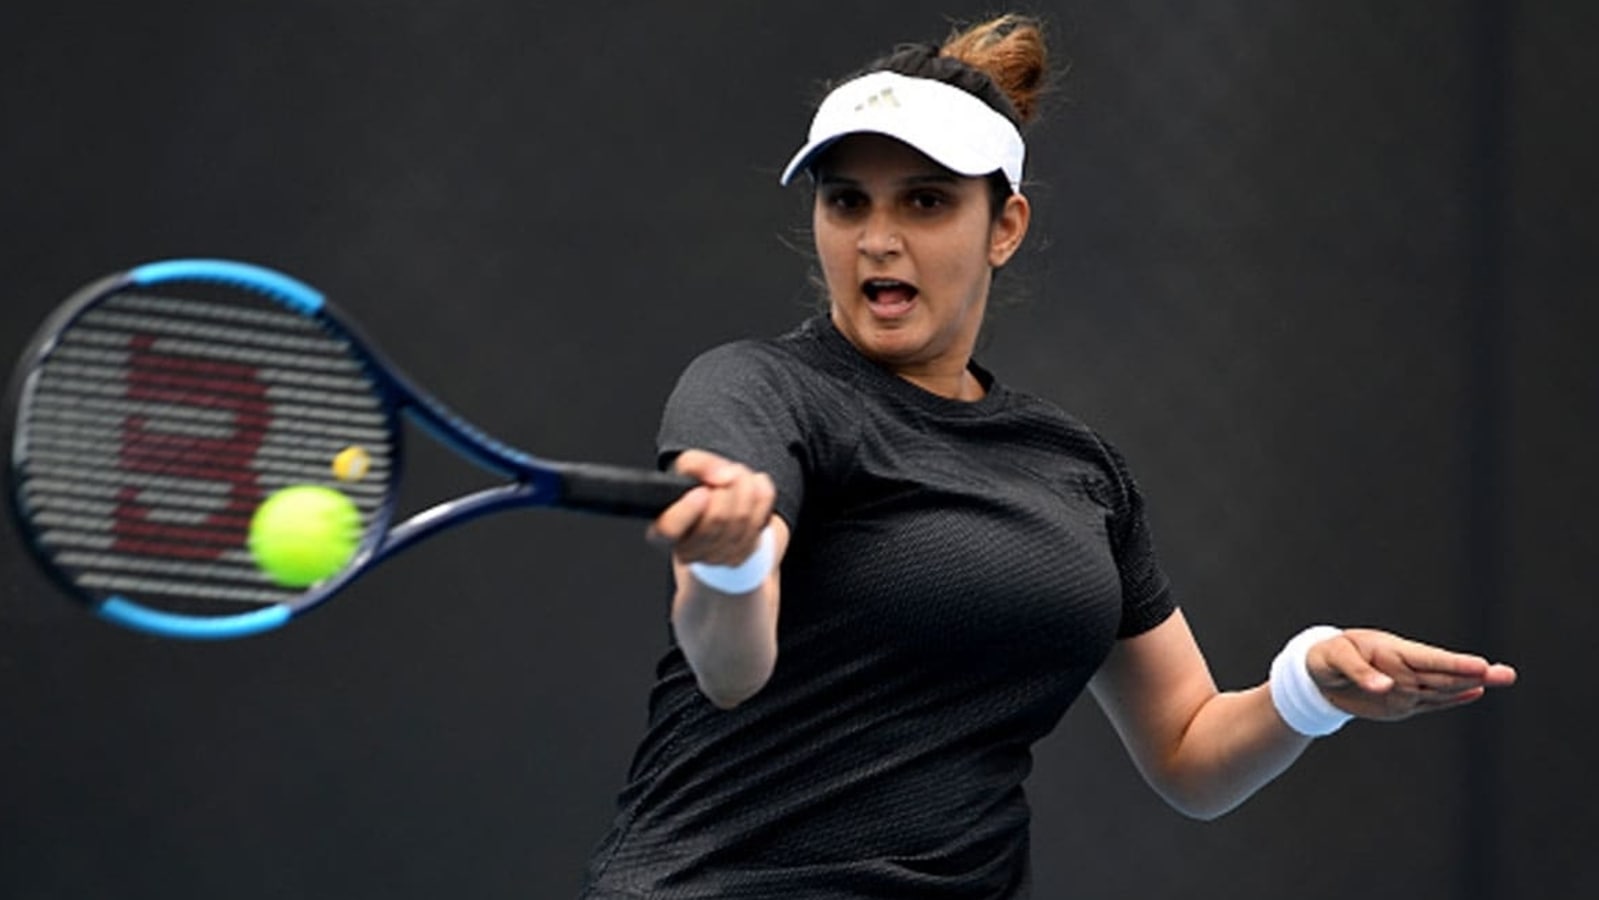 Sania Mirza to retire after WTA 1000 event in Dubai in February